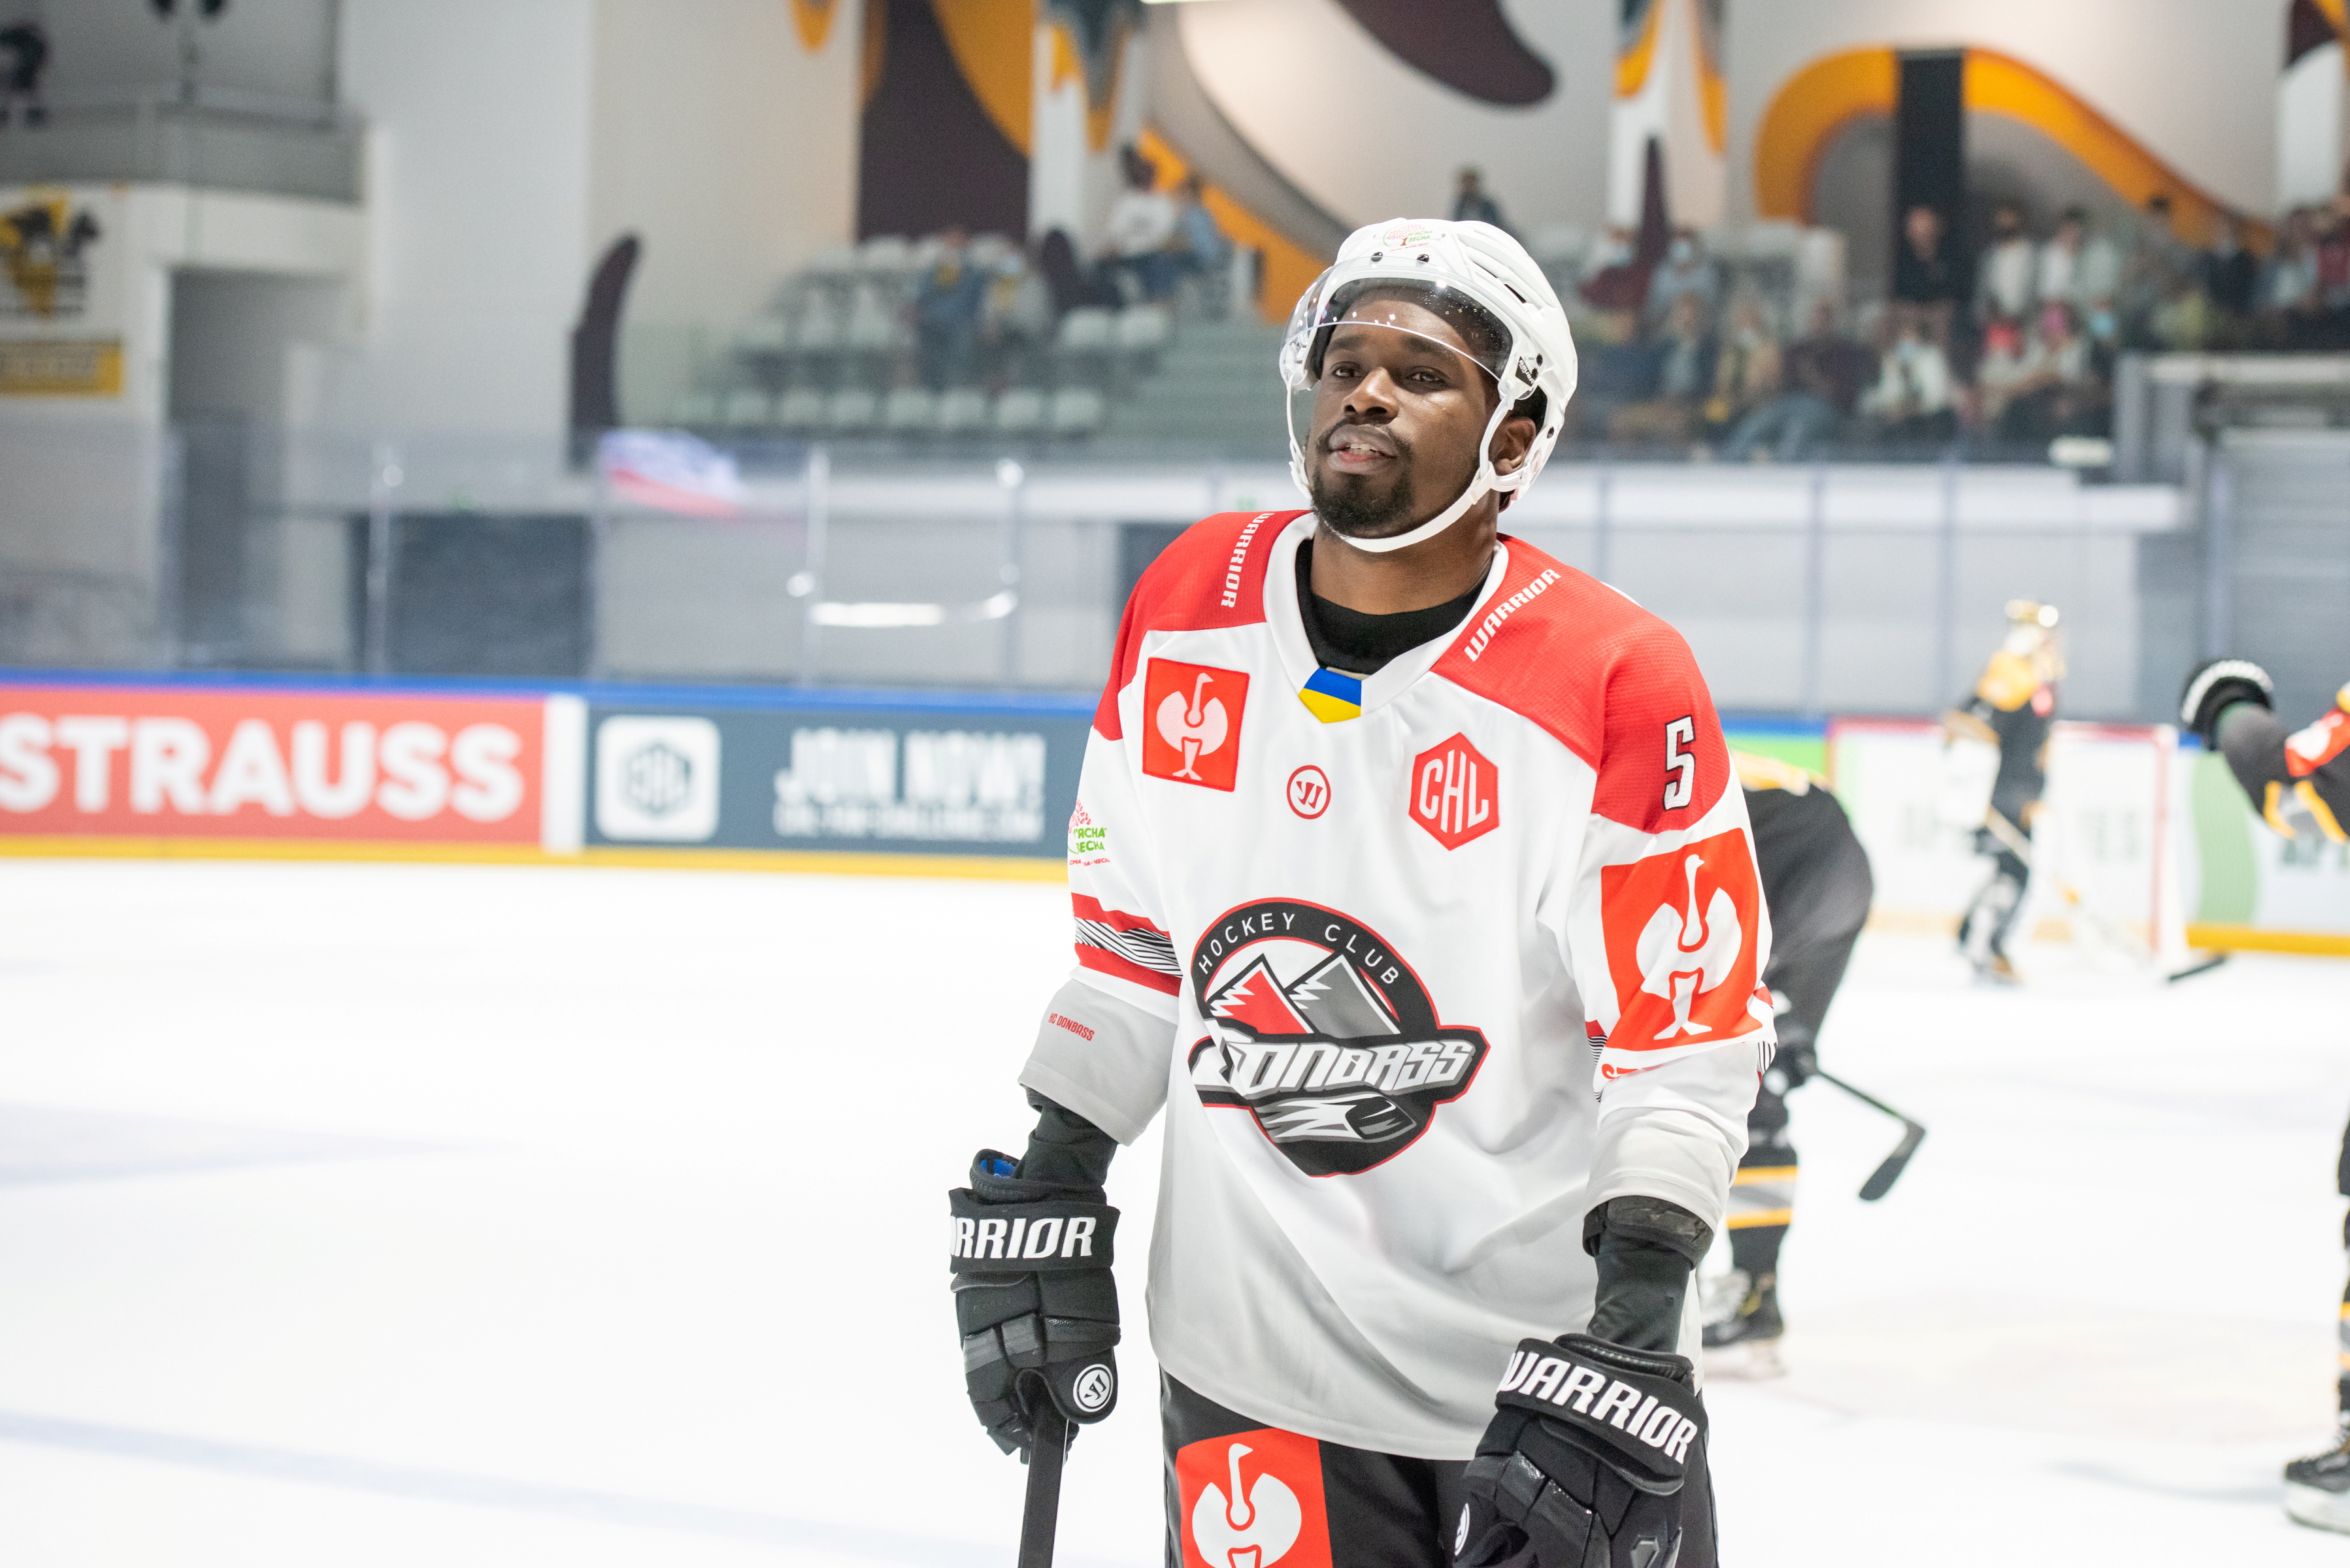 HC Donbass player Jalen Smereck is seen during the Hockey Champions League match against HC Rouen Dragons in Rouen